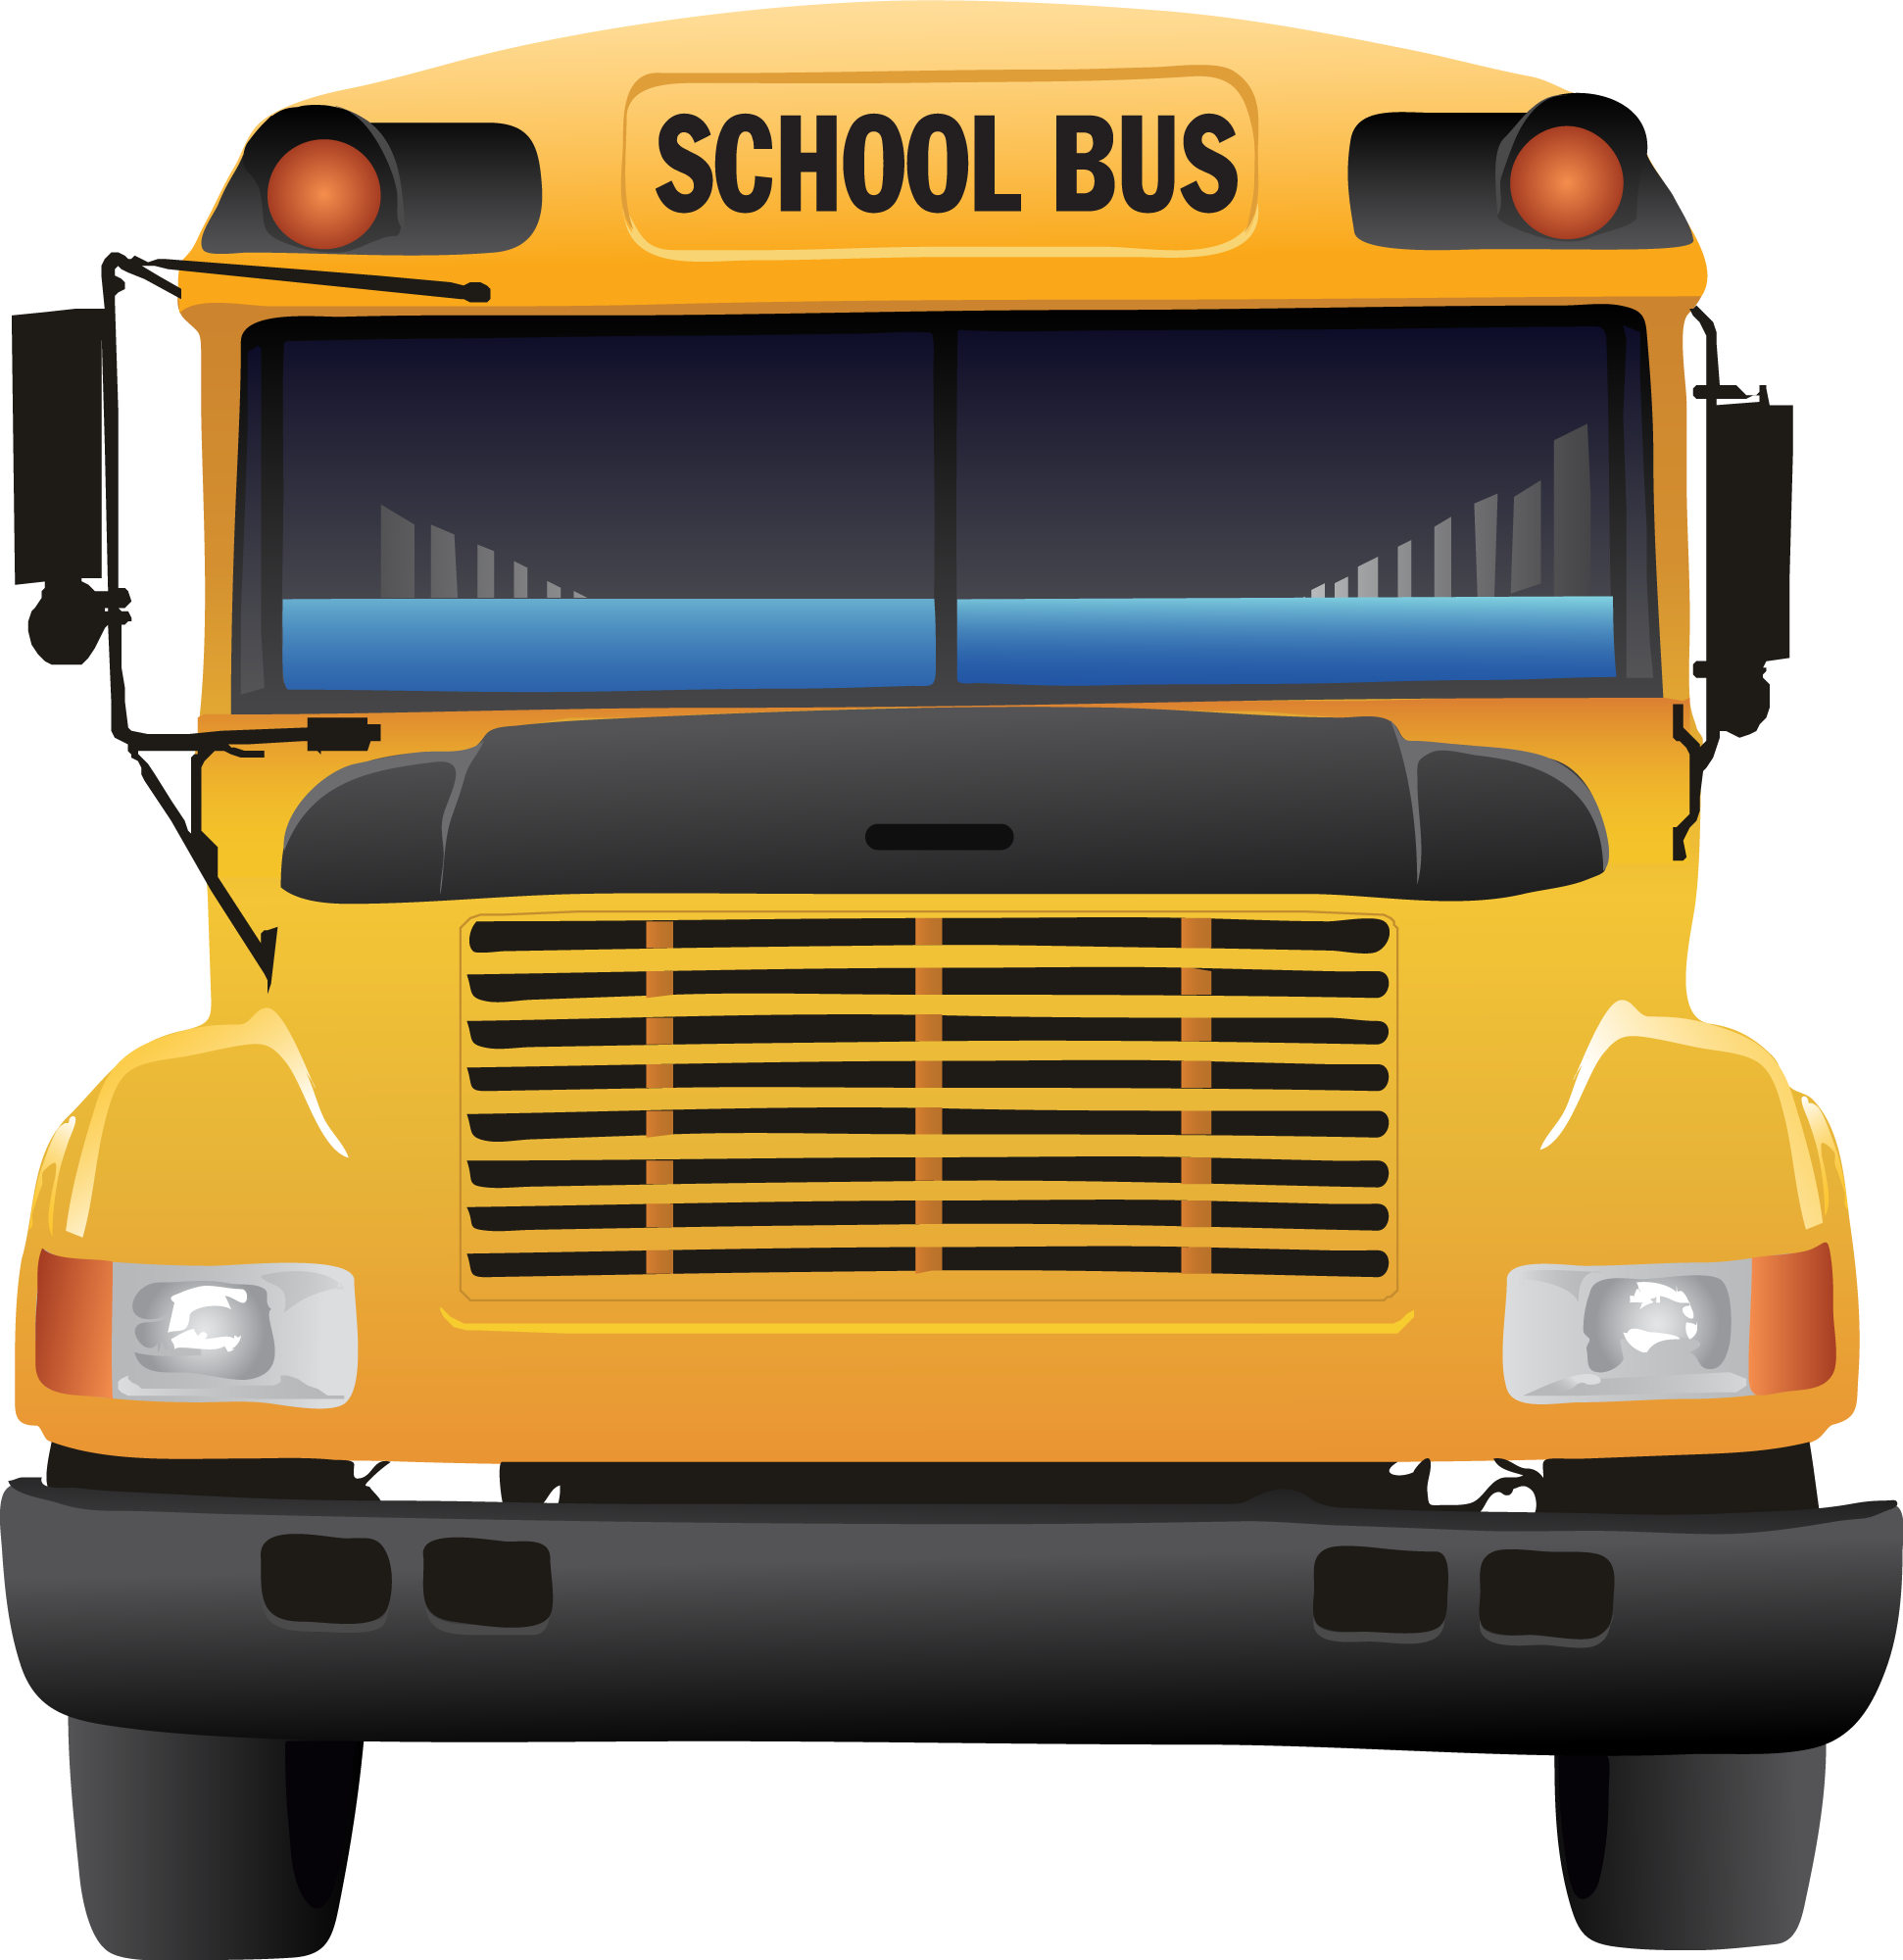 School bus from collection. Valentine clipart truck